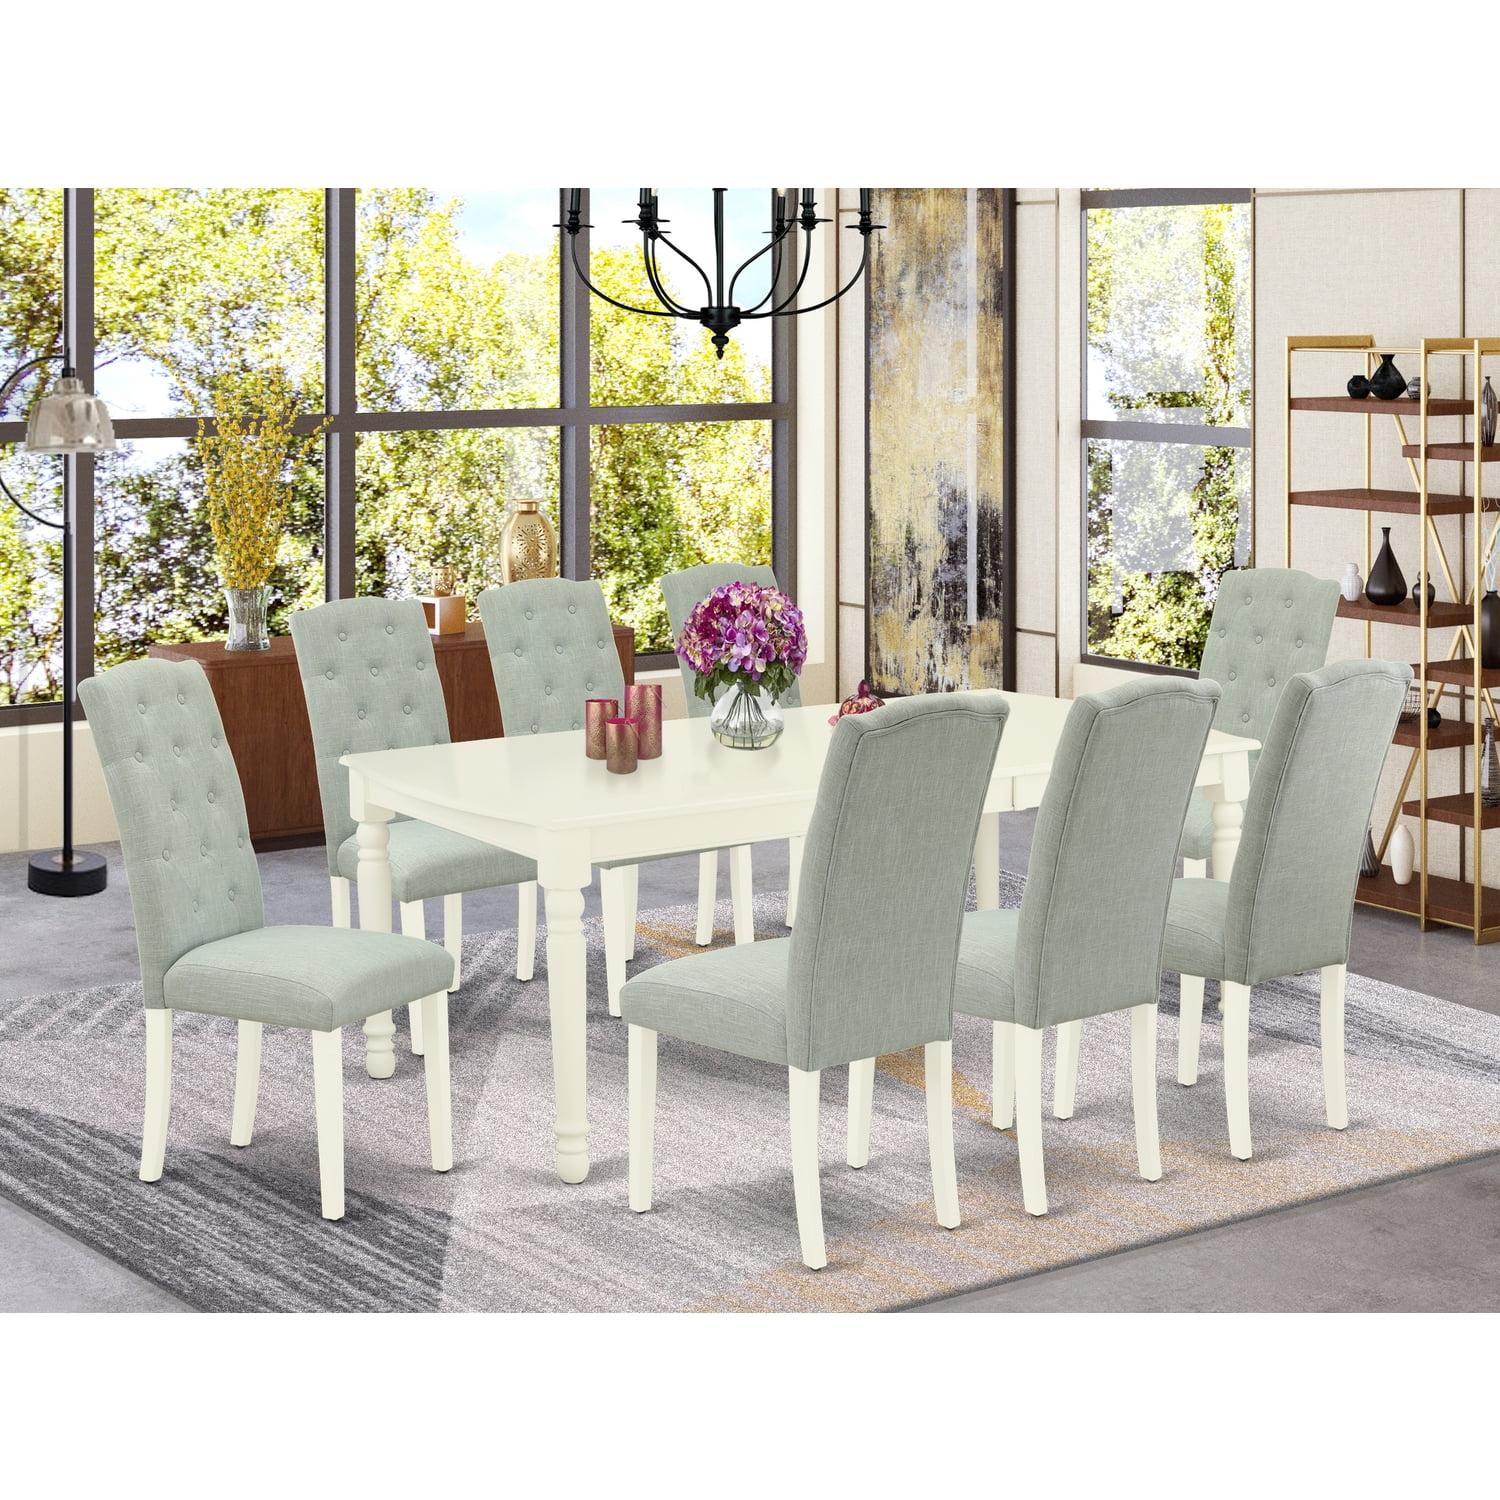 Linen White Rectangular Dining Set with Baby Blue Parson Chairs